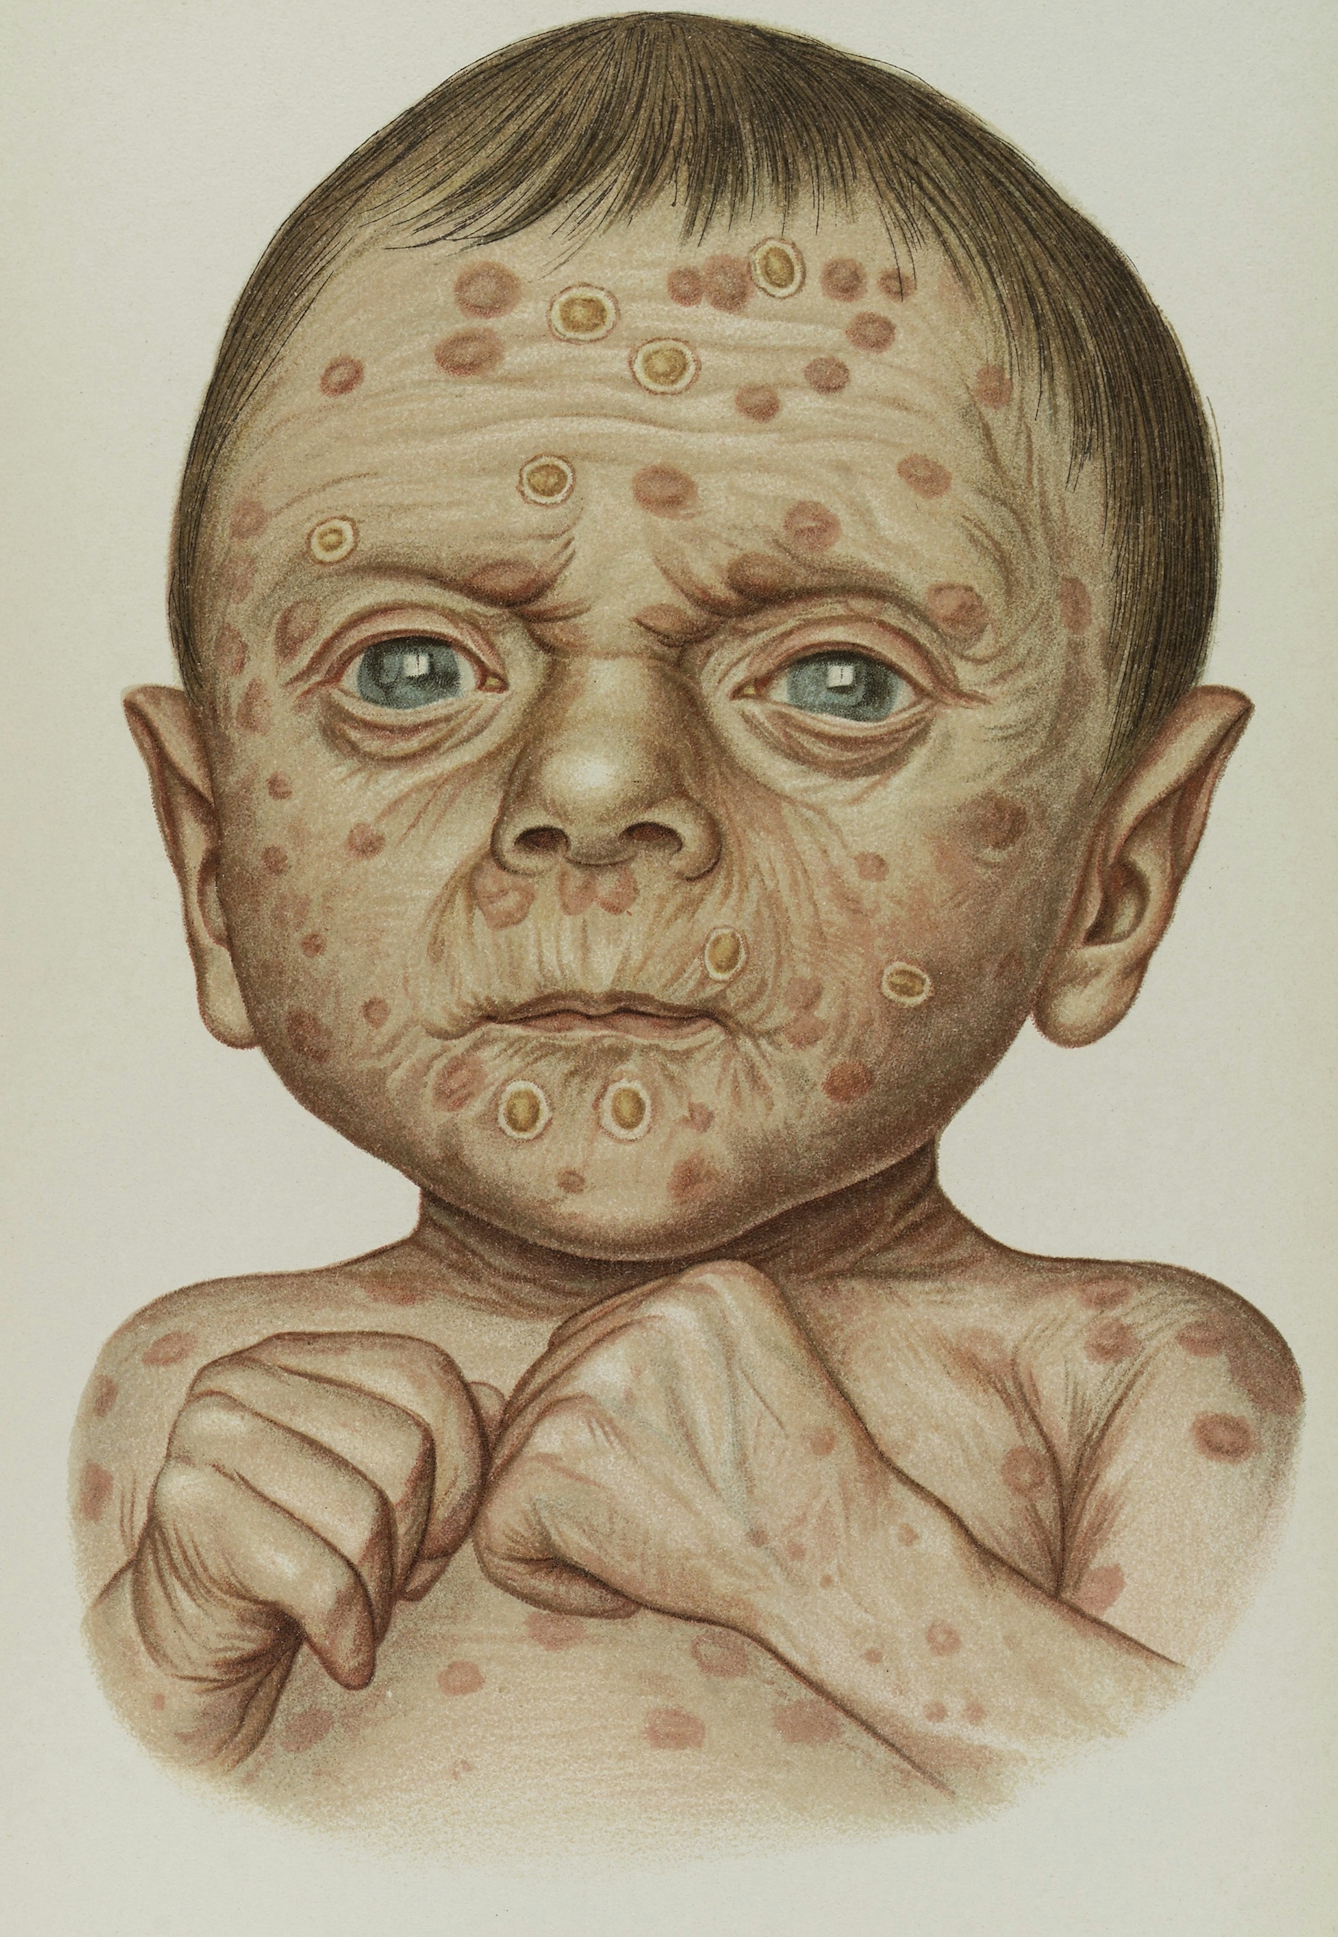 A four-week-old baby with congenital syphilis.